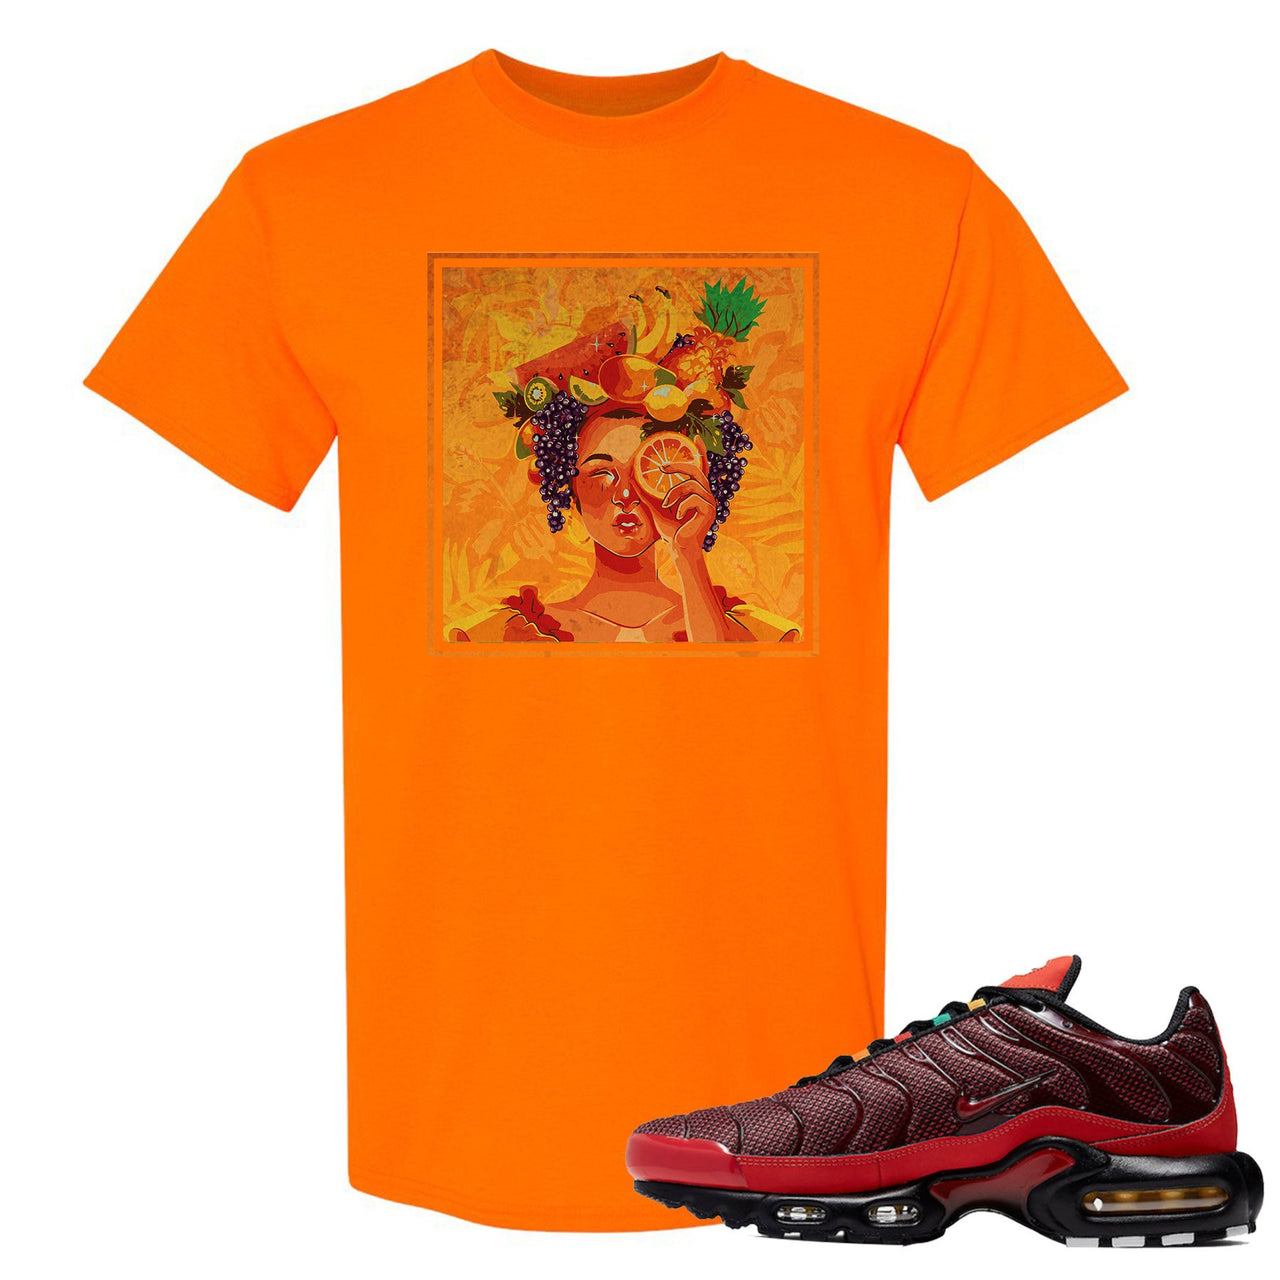 printed on the front of the air max plus sunburst sneaker matching tee shirt is the lady fruit logo